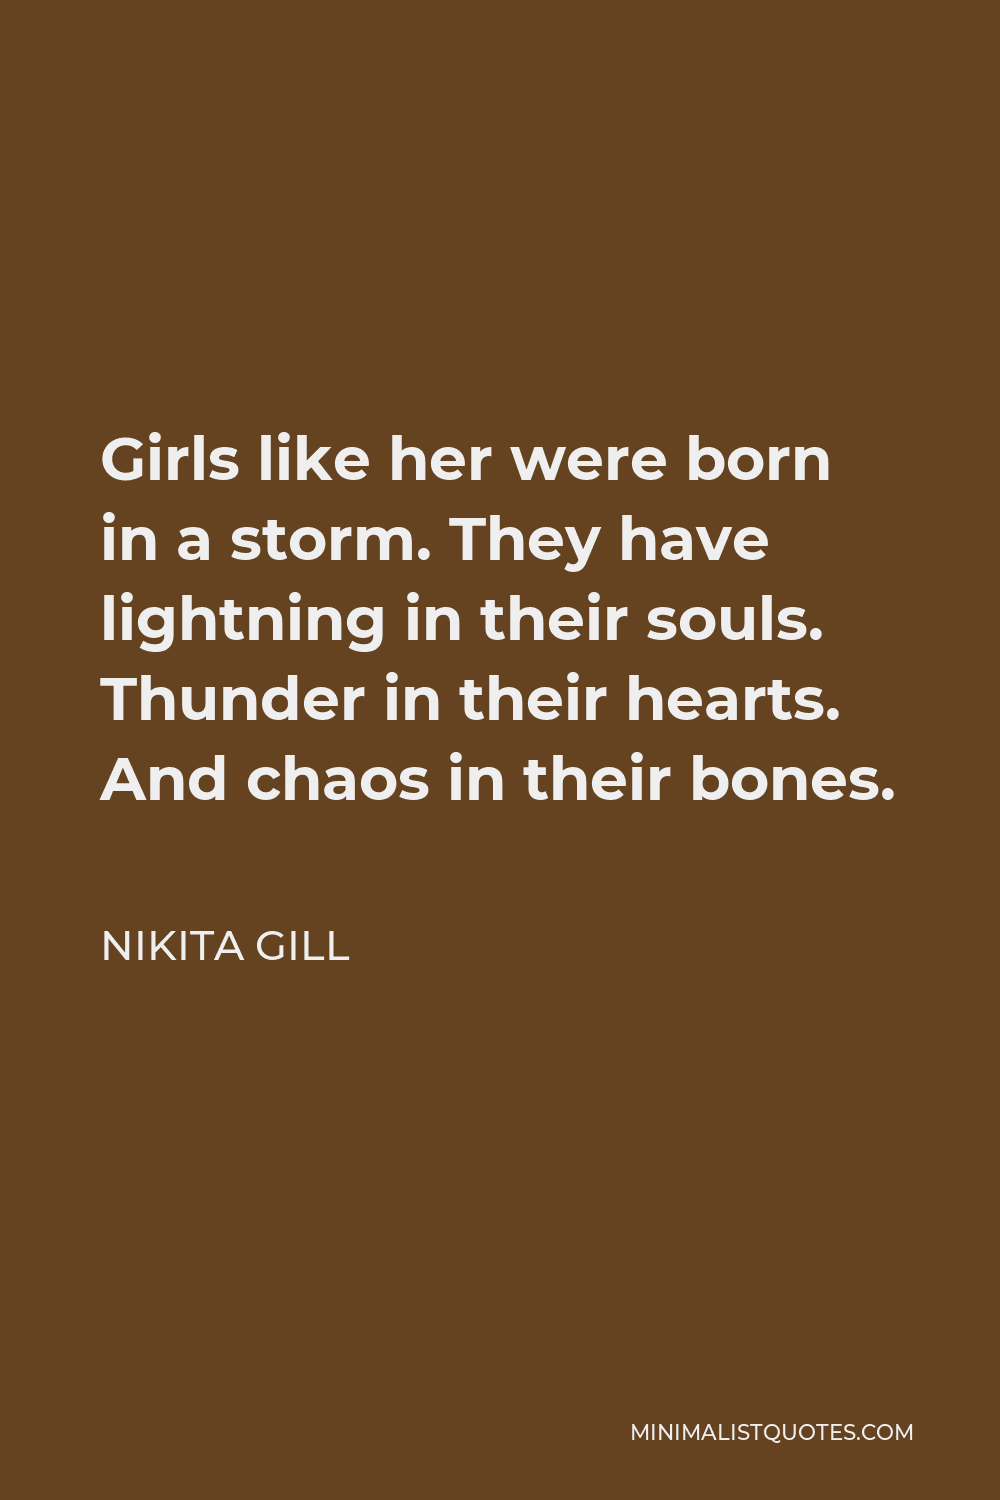 Nikita Gill Quote - Girls like her were born in a storm. They have lightning in their souls. Thunder in their hearts. And chaos in their bones.